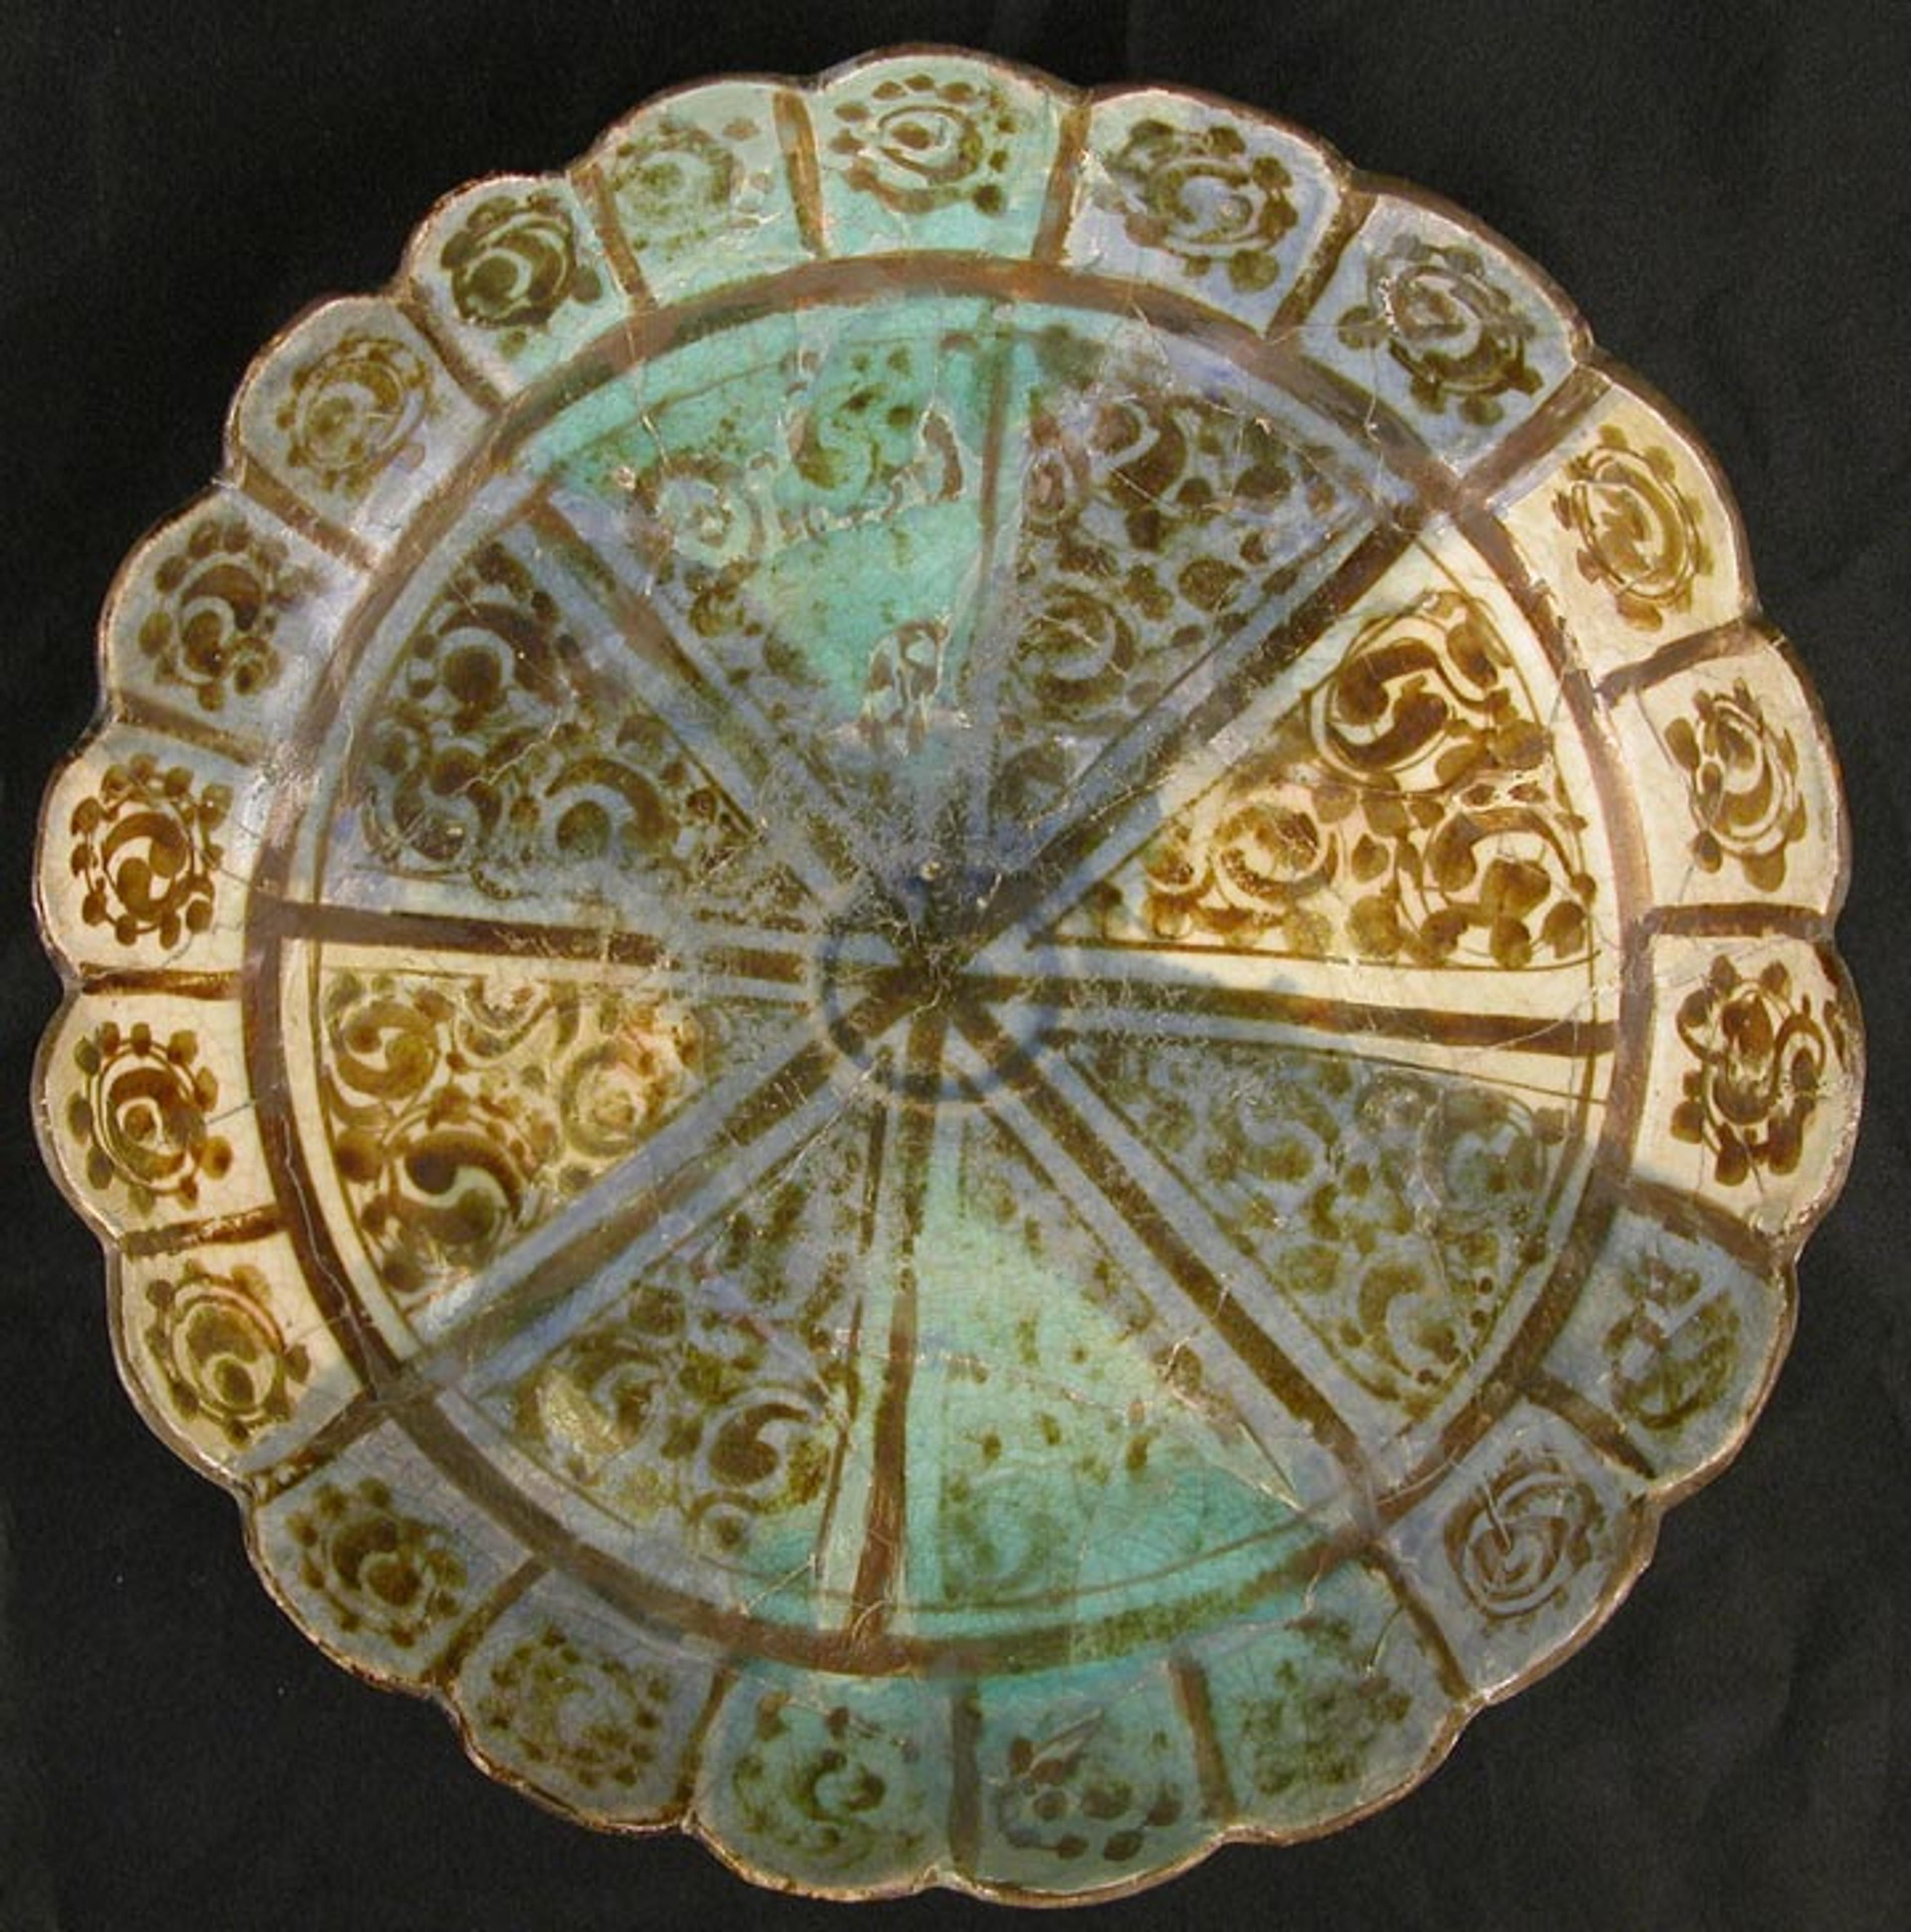 Dish with scalloped rim and radial pattern | 66.159